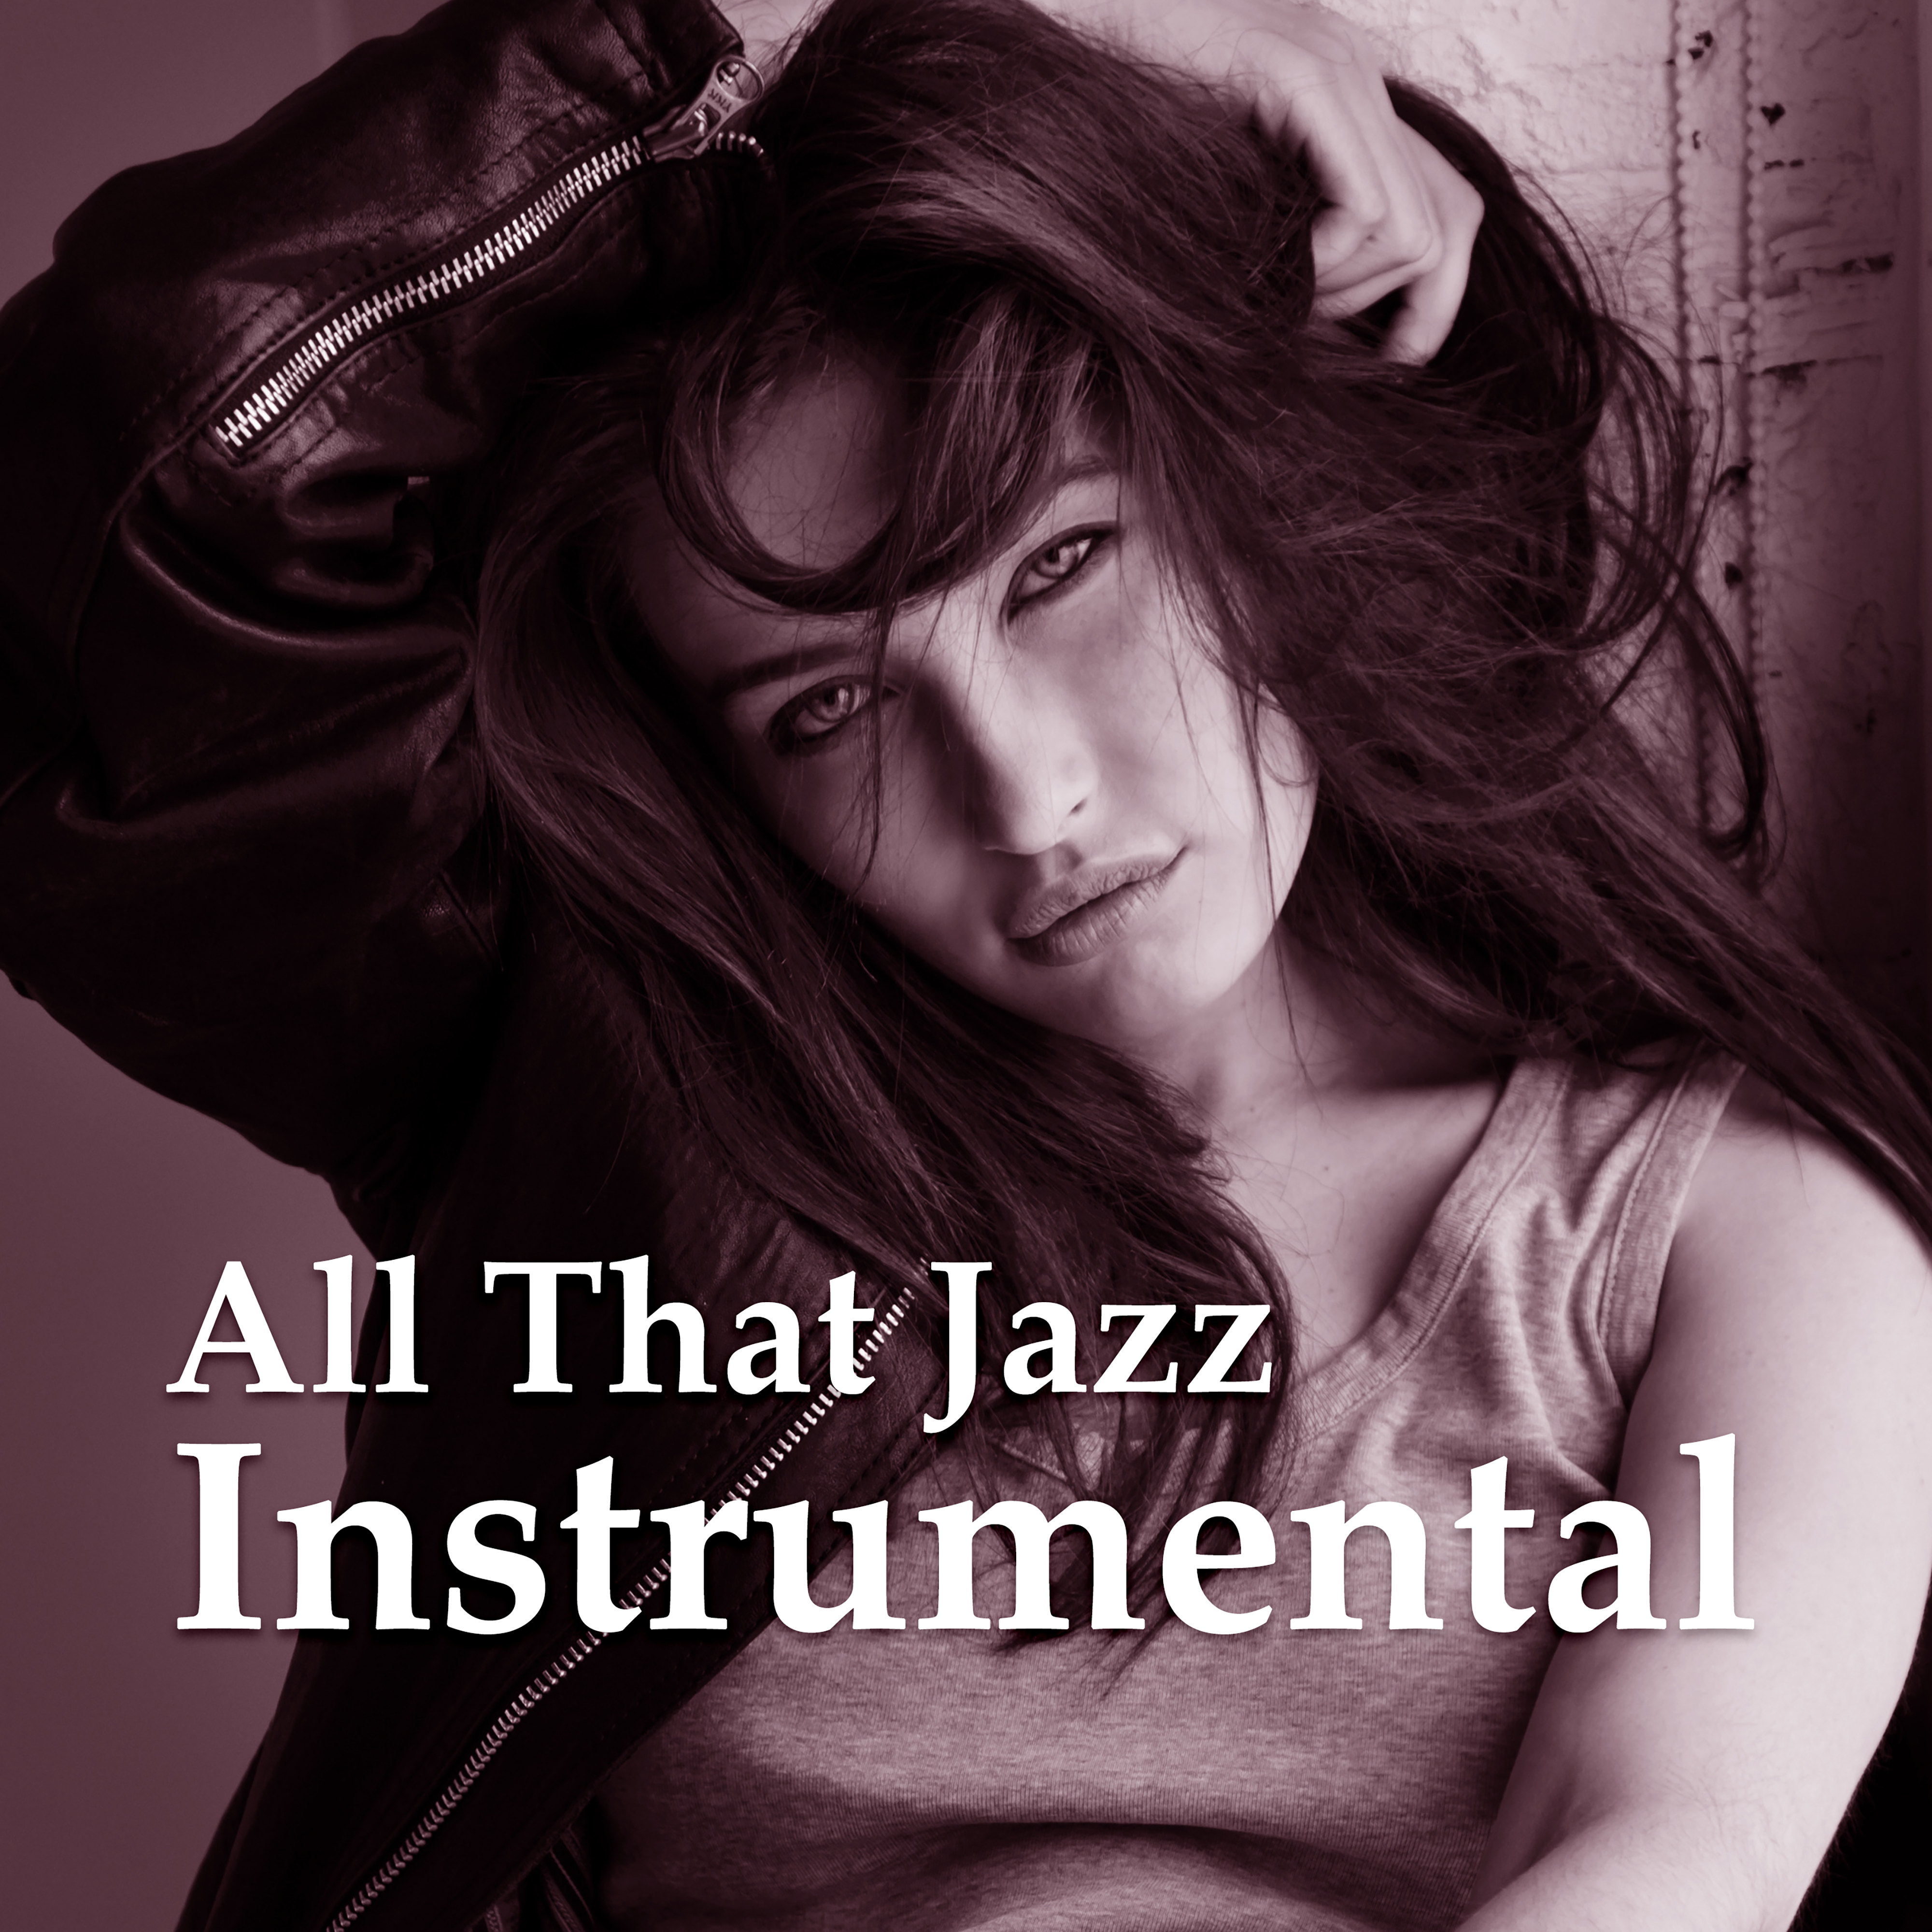 All That Jazz Instrumental – Mellow Piano, Instrumental Songs, Ambient Jazz Lounge, Relaxed Soft Piano